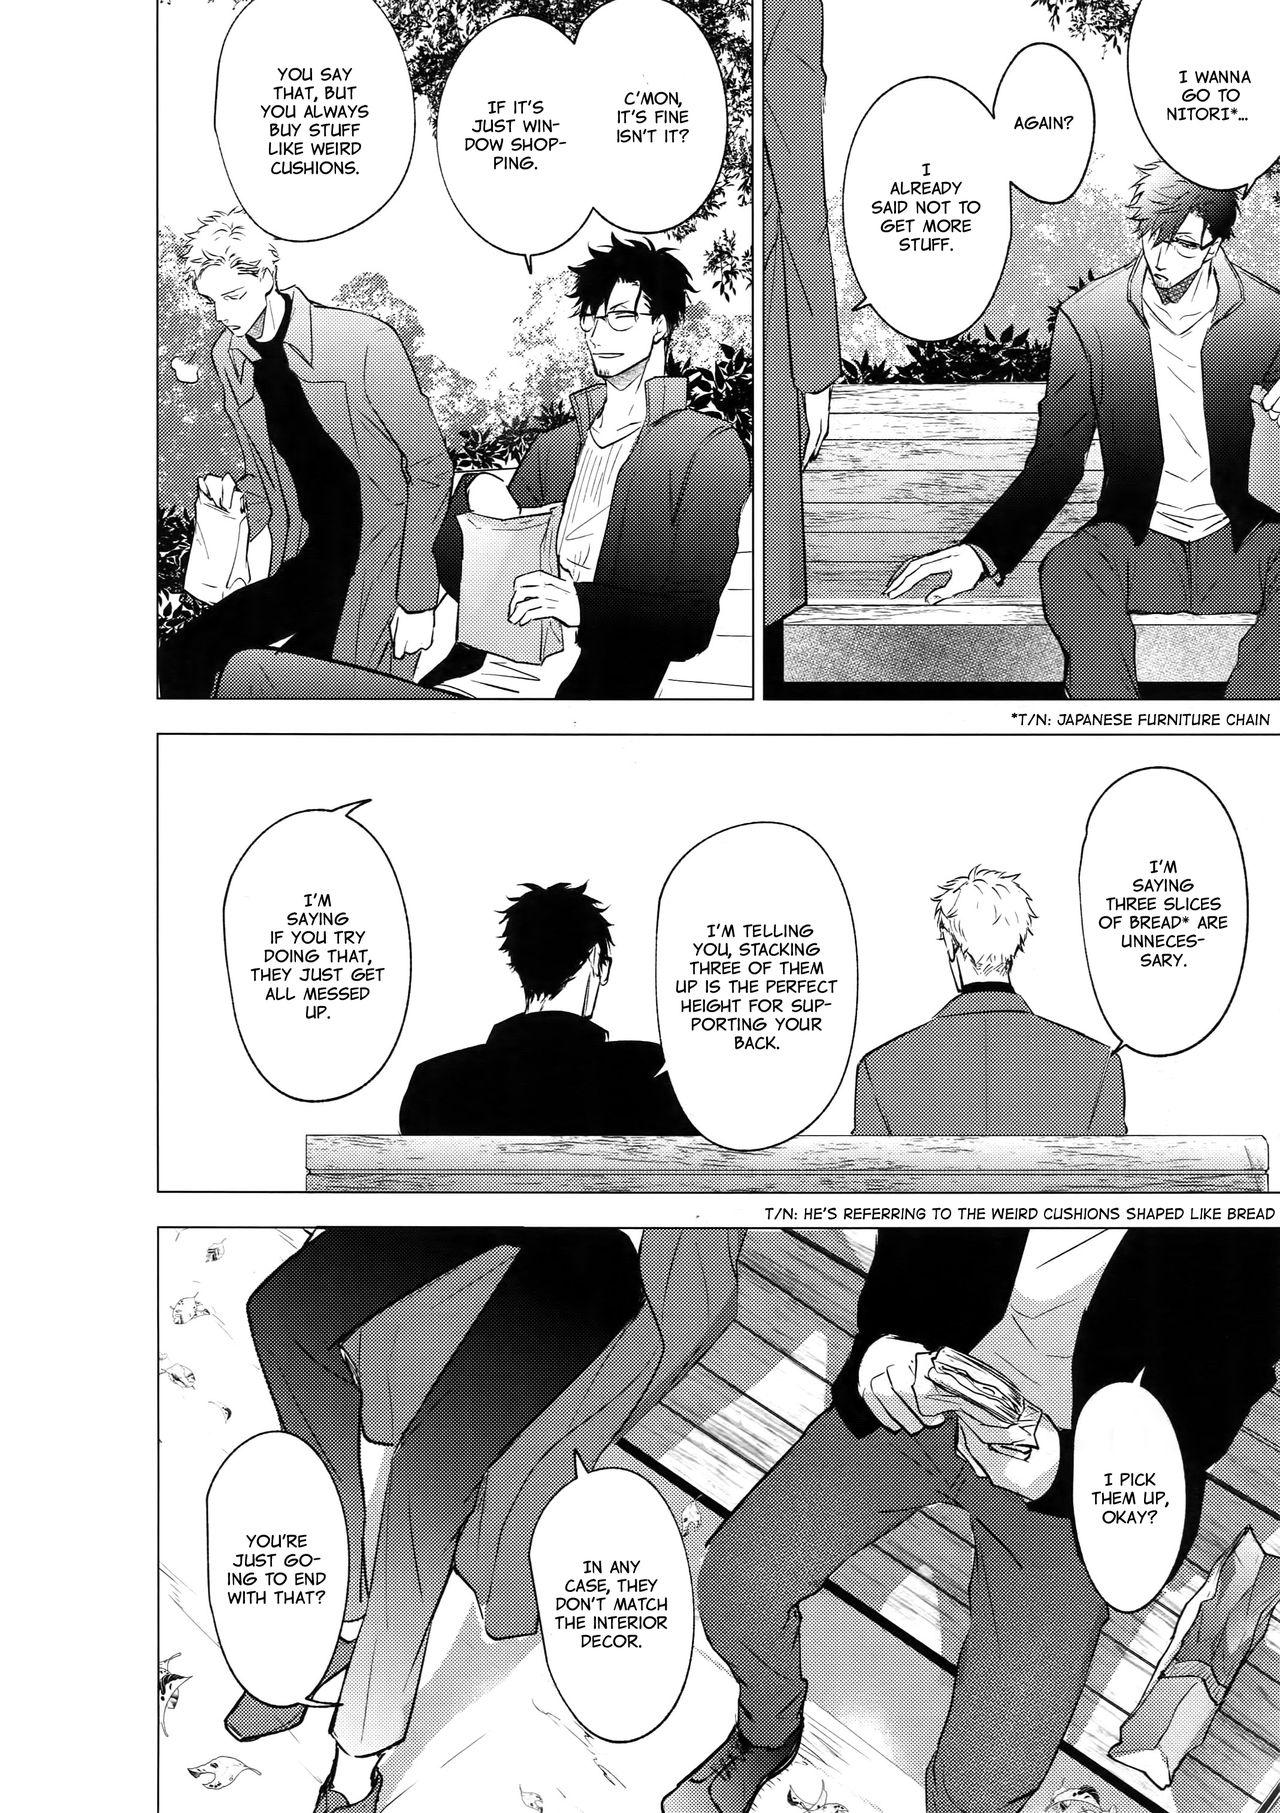 Oldvsyoung VOW - Haikyuu Missionary Position Porn - Page 4